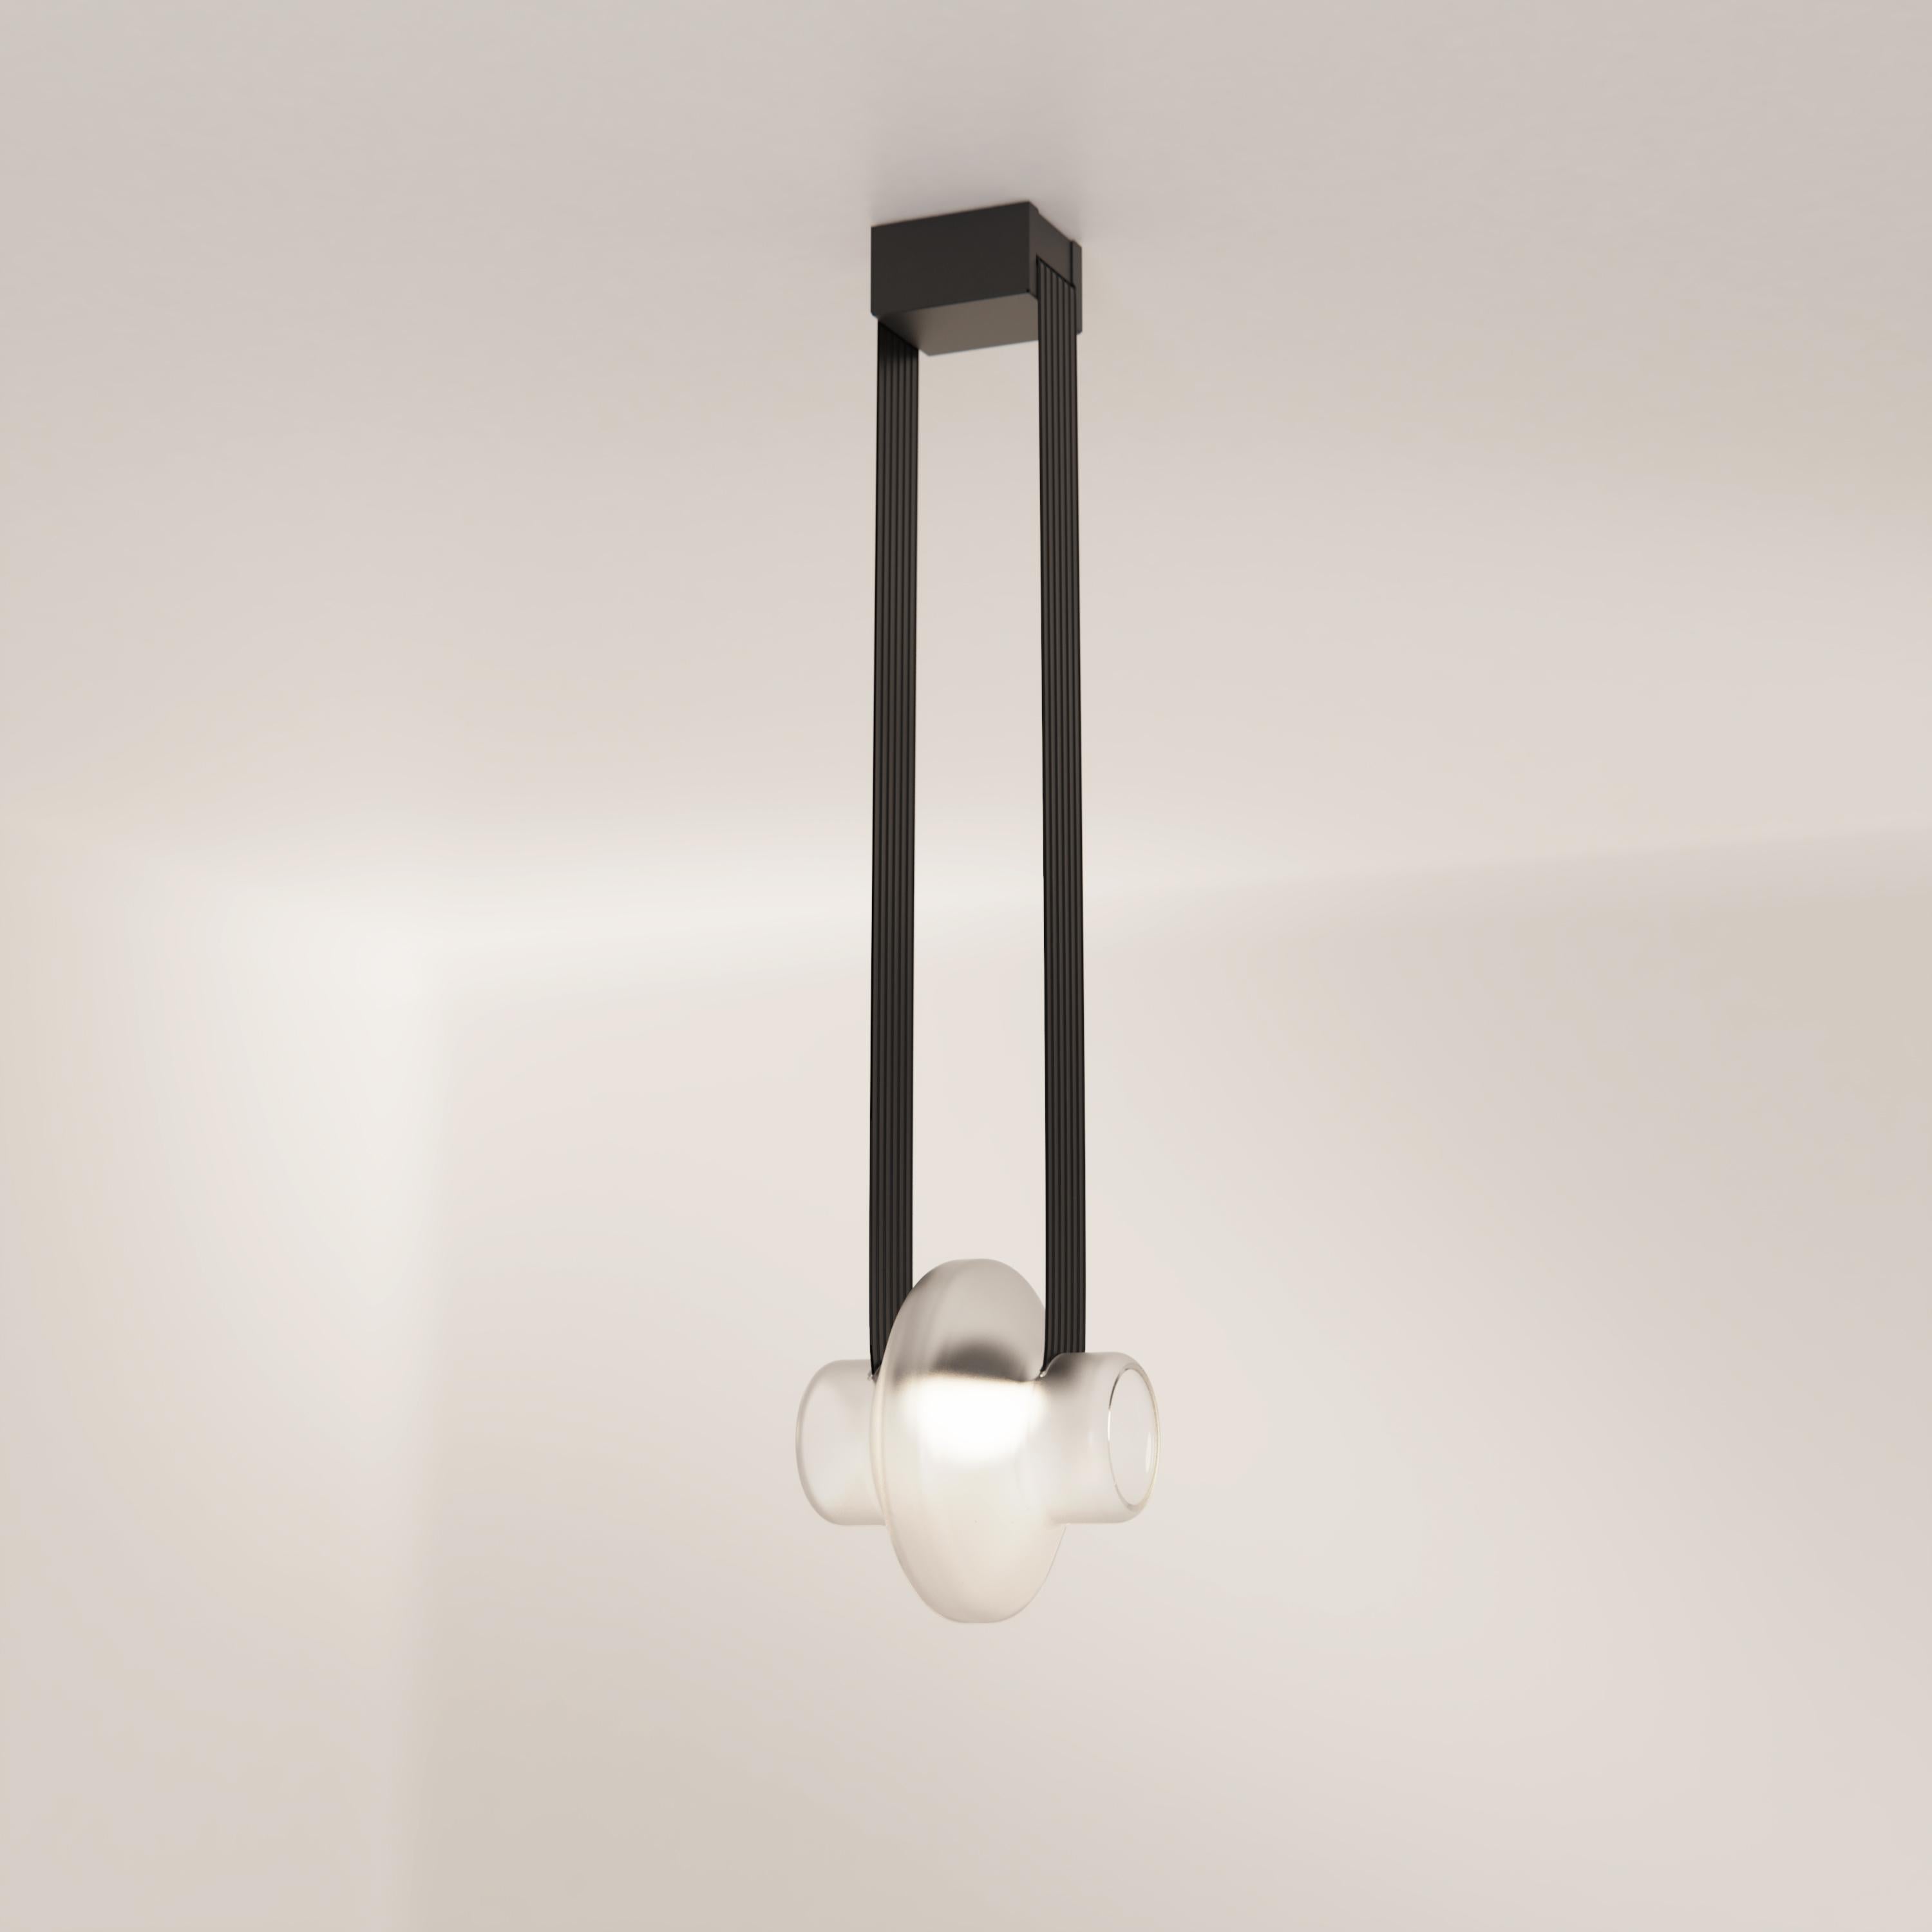 Etat-des-Lieux is a contemporary lighting system with an adaptive silhouette. The 1A configuration is a single pendant that can also be added to other modules to create a unique luminaire.

Etat-des-Lieux, a contemporary lighting system defined by